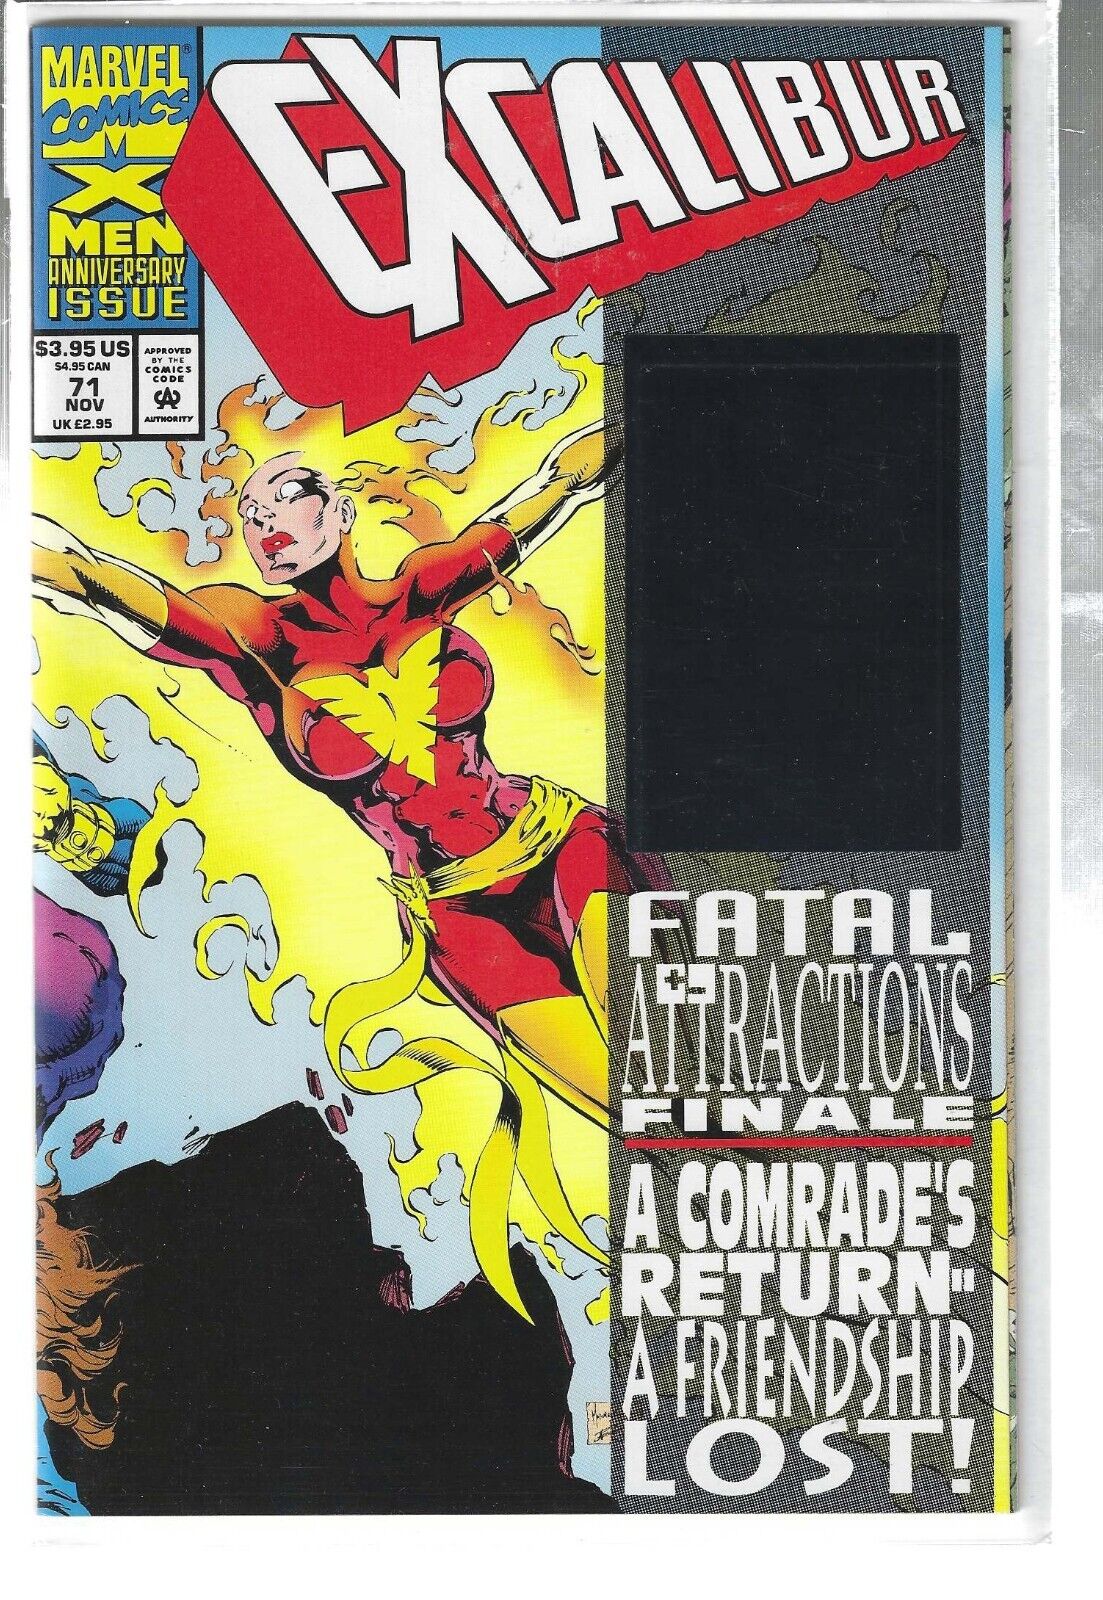 FATAL ATTRACTIONS X-FORCE #25 & EXCALIBUR #71 1993 HOLGRAM VARIANTS AVG 9.6/NM+